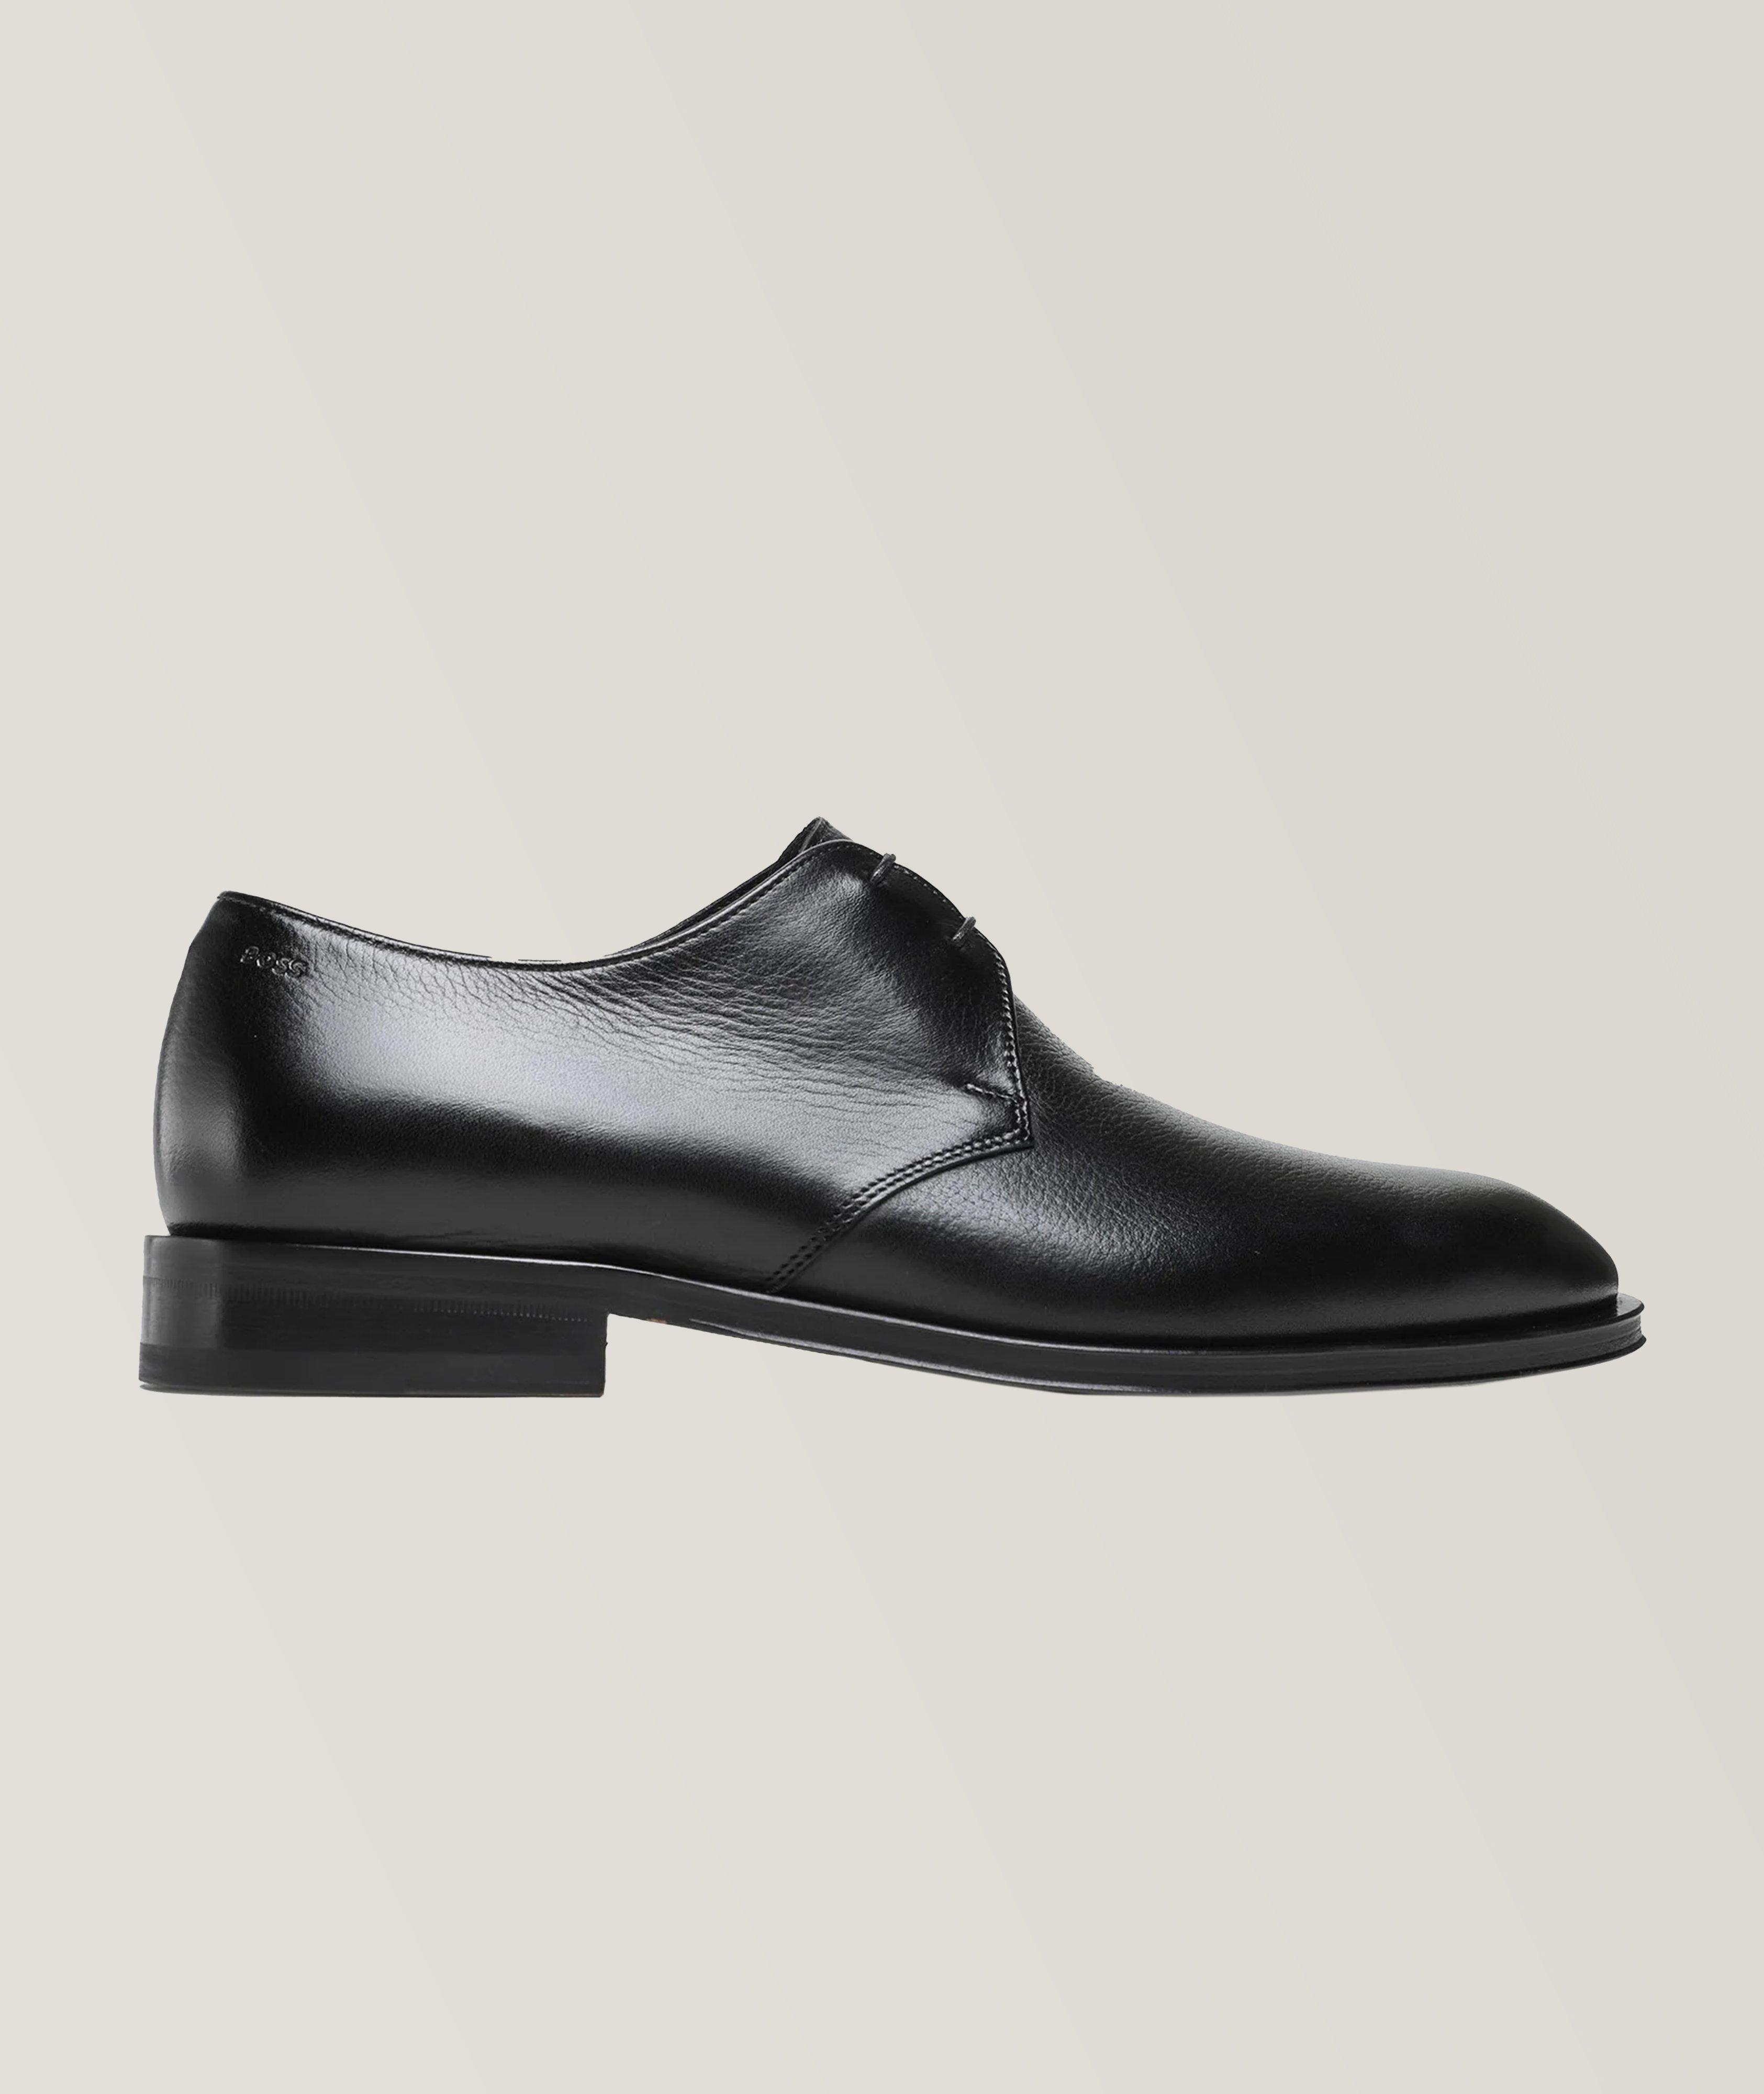 Louis Vuitton leather dress shoes clean and neat sneaker for Sale in